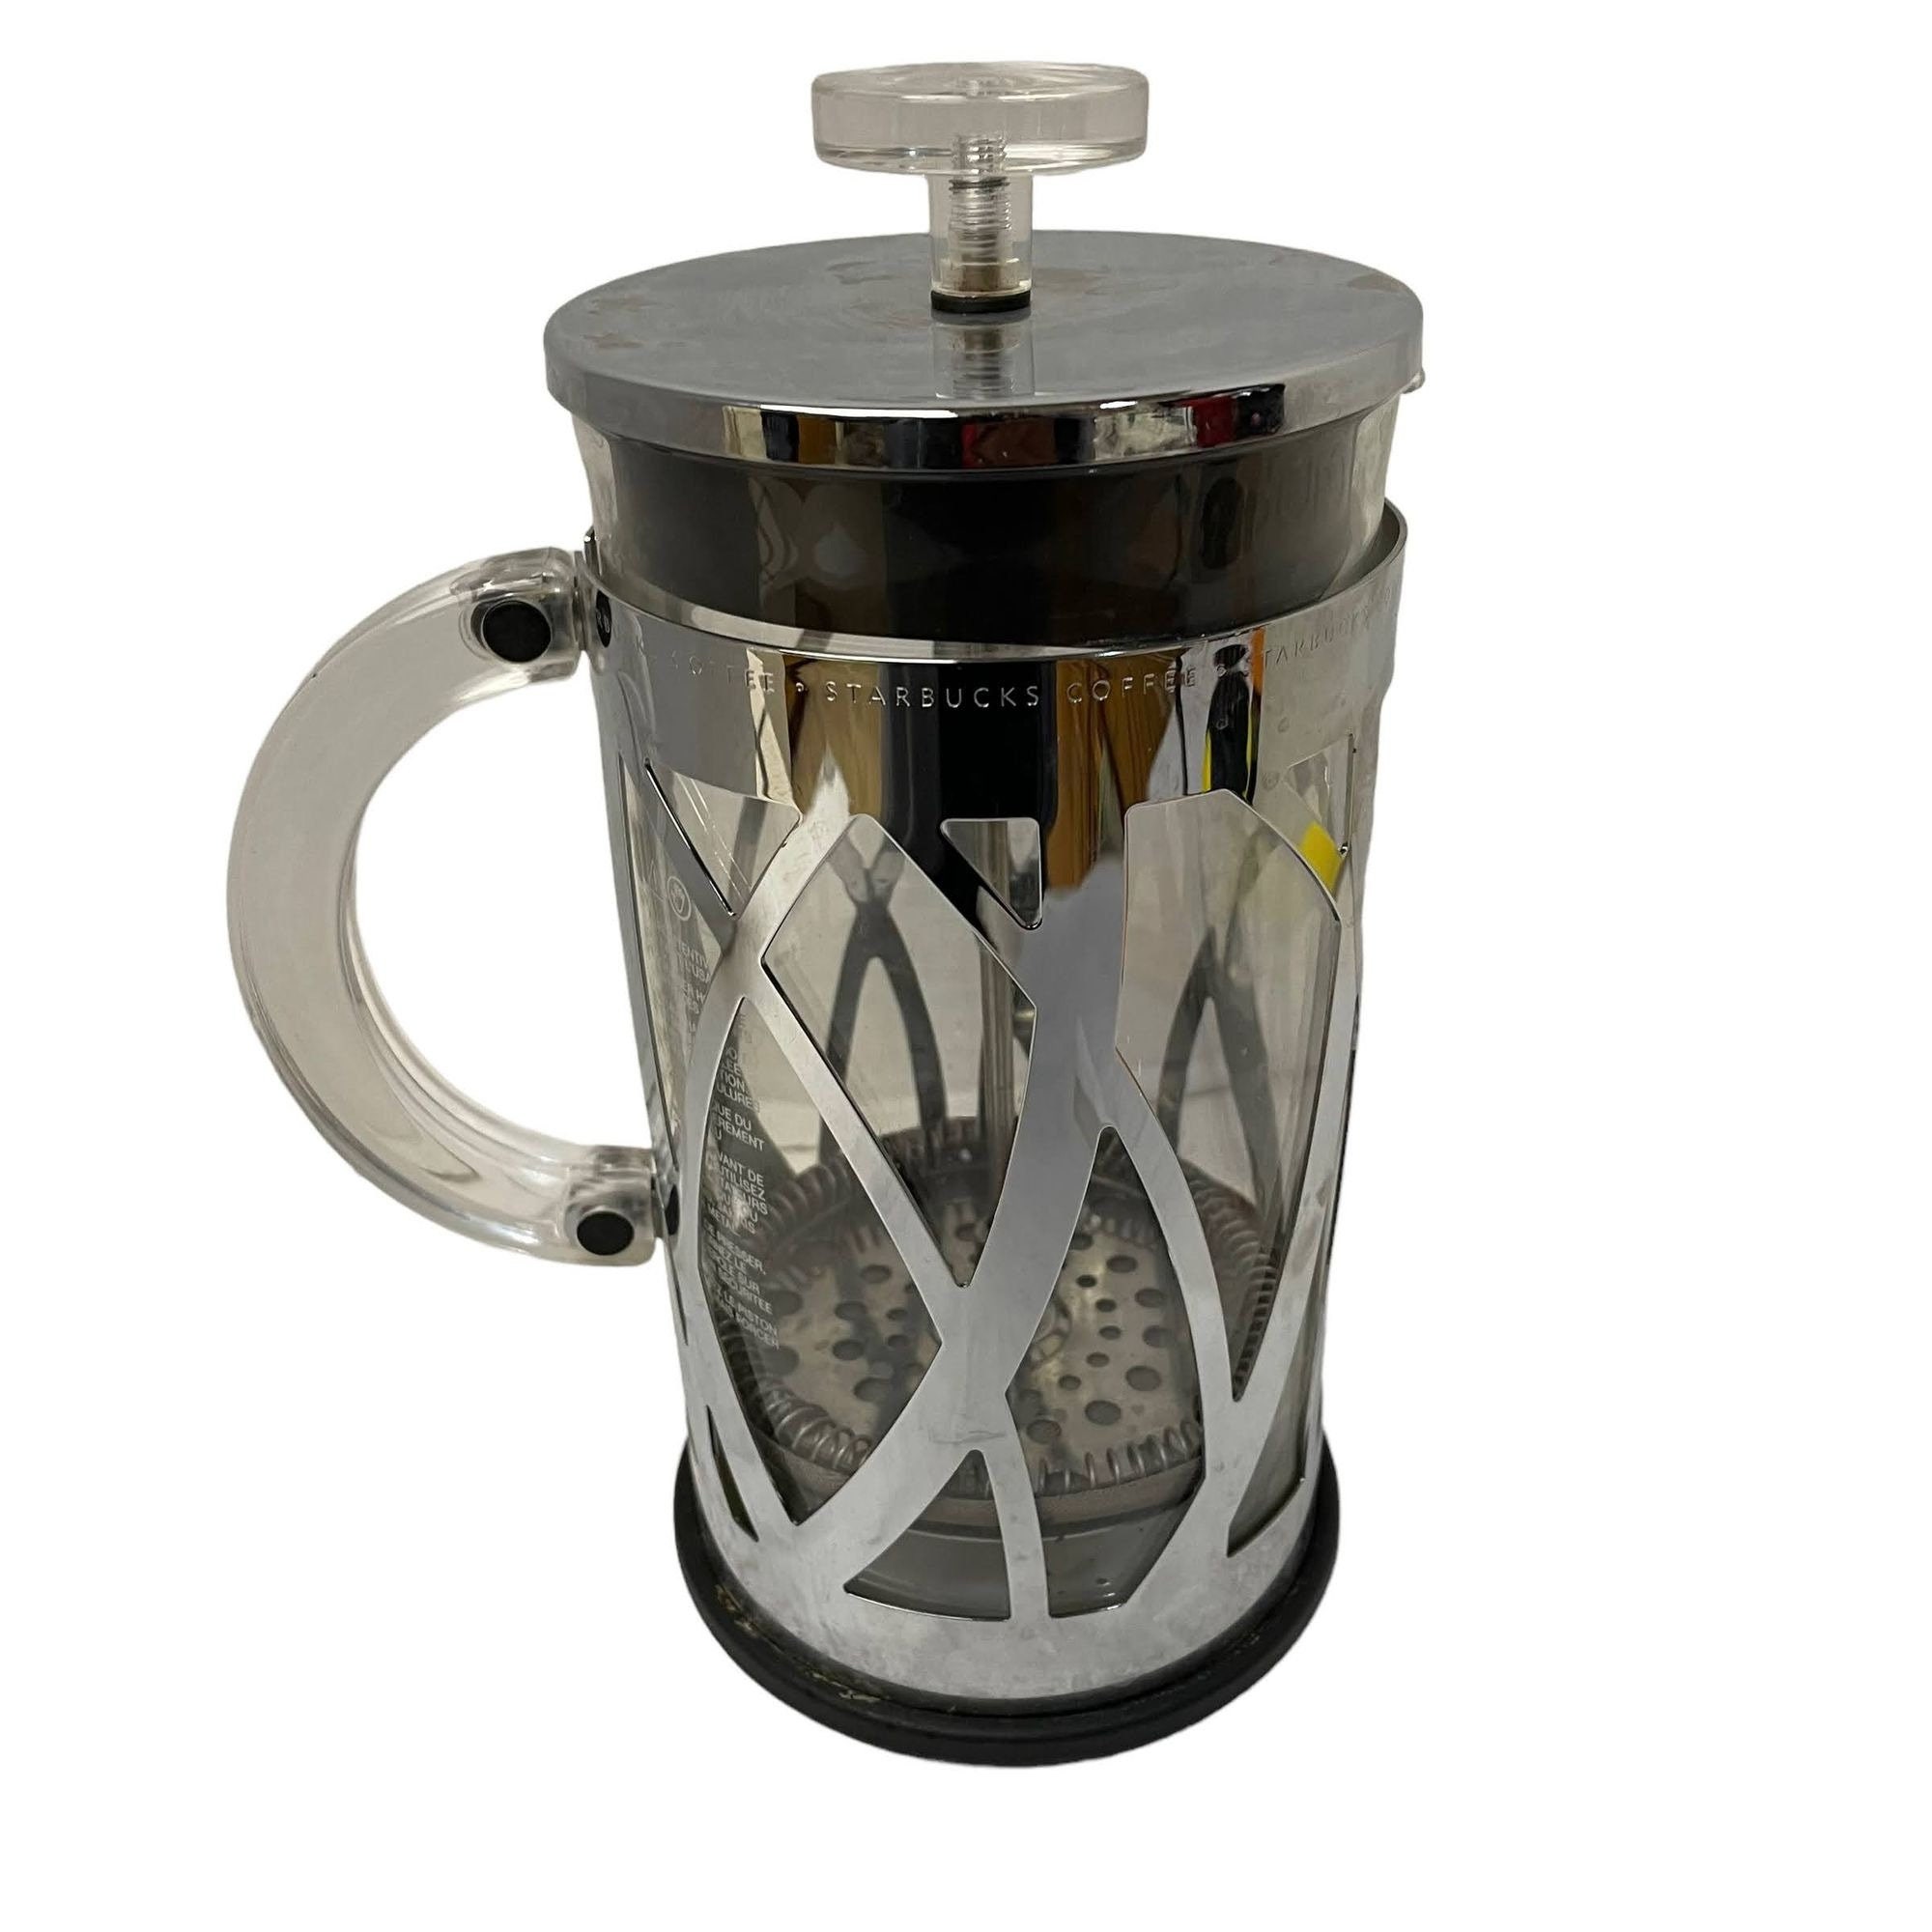 Starbucks Barista Cup French Press Glass and Stainless Steel Coffee Maker